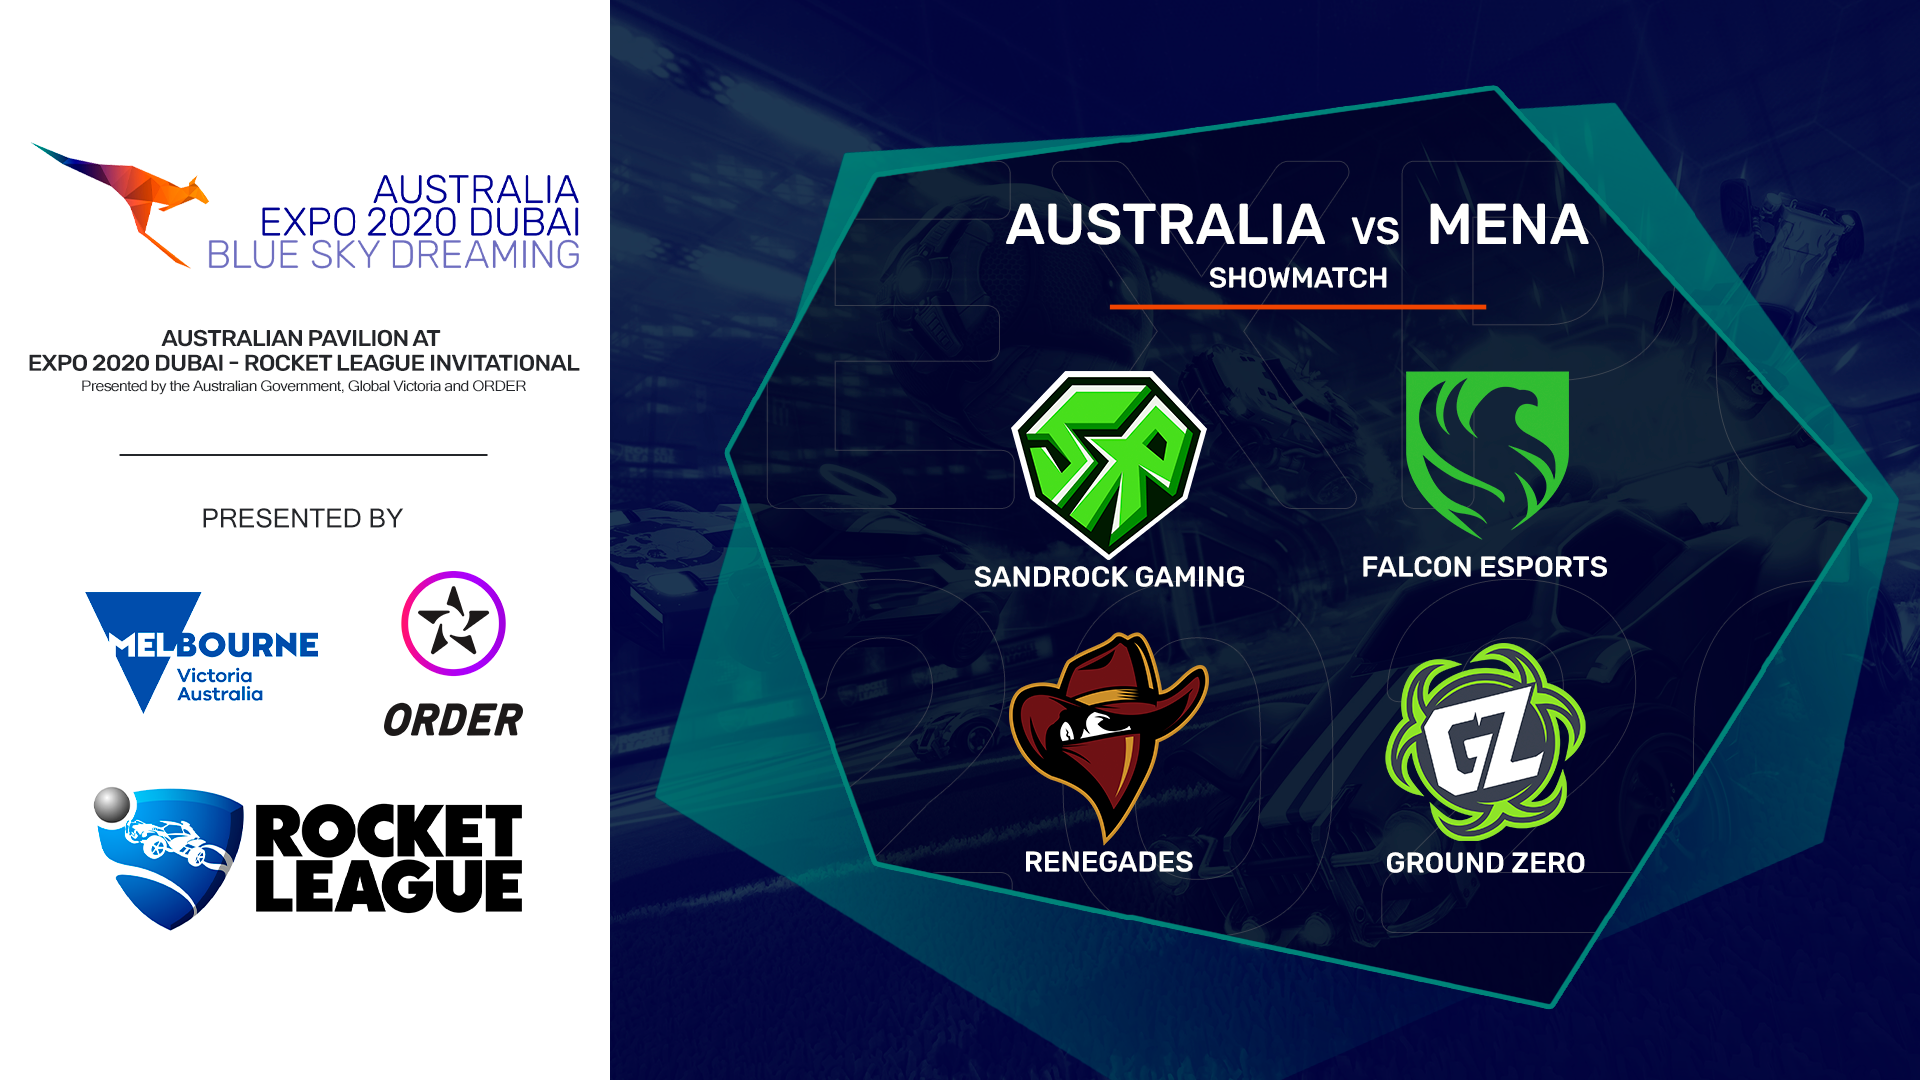 ORDER, Australian and Victorian Governments to host Rocket League Invitational at Expo 2020, Nexus Gaming LLC